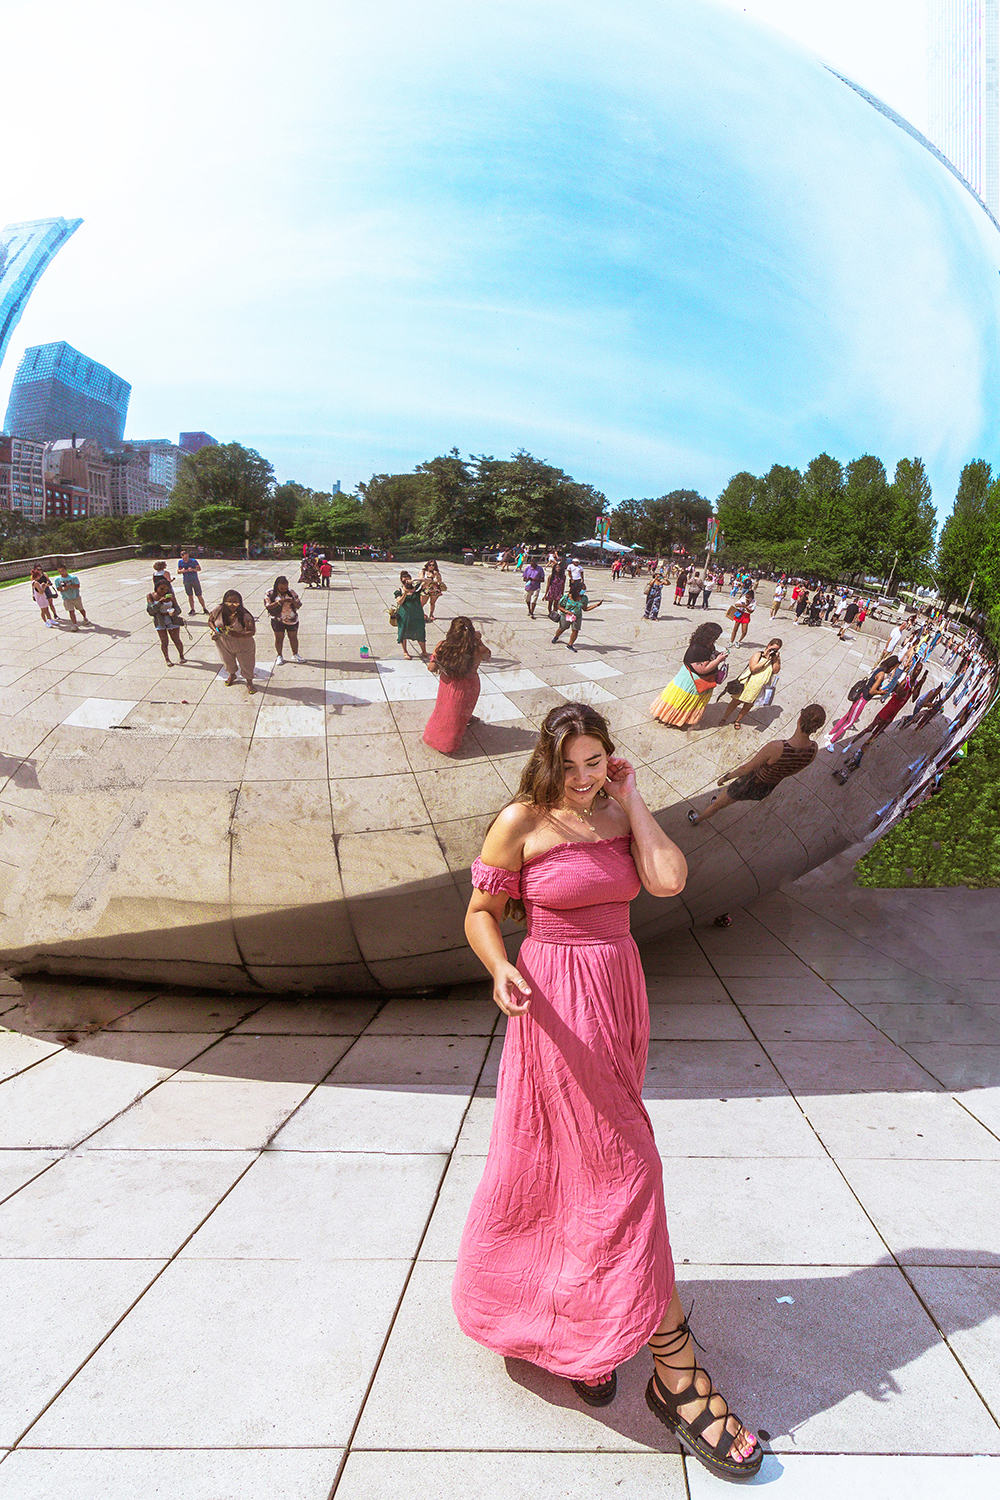 Cloud Gate aka The Bean in Millennium Park reflects crowds of tourists while lauryn walks alone in a summer maxi dress